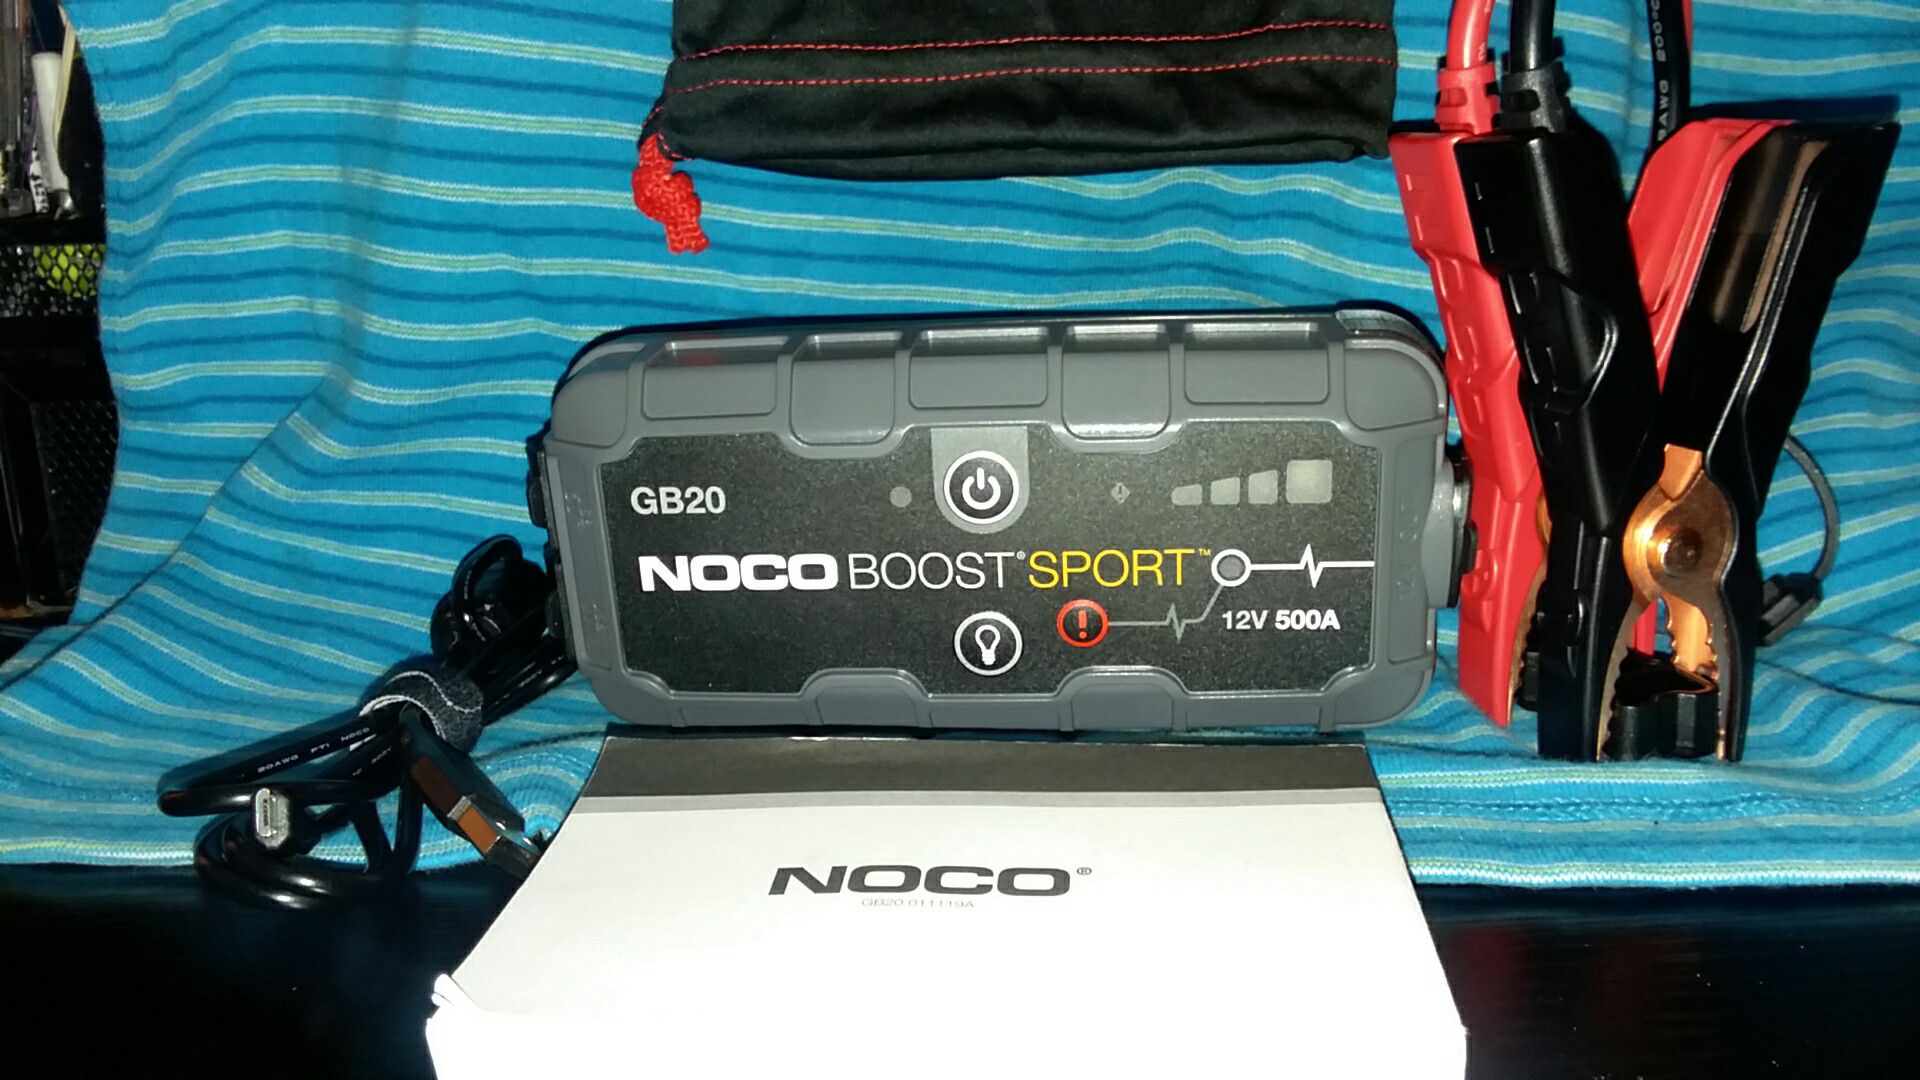 NOCO Portable jump starter and much more.